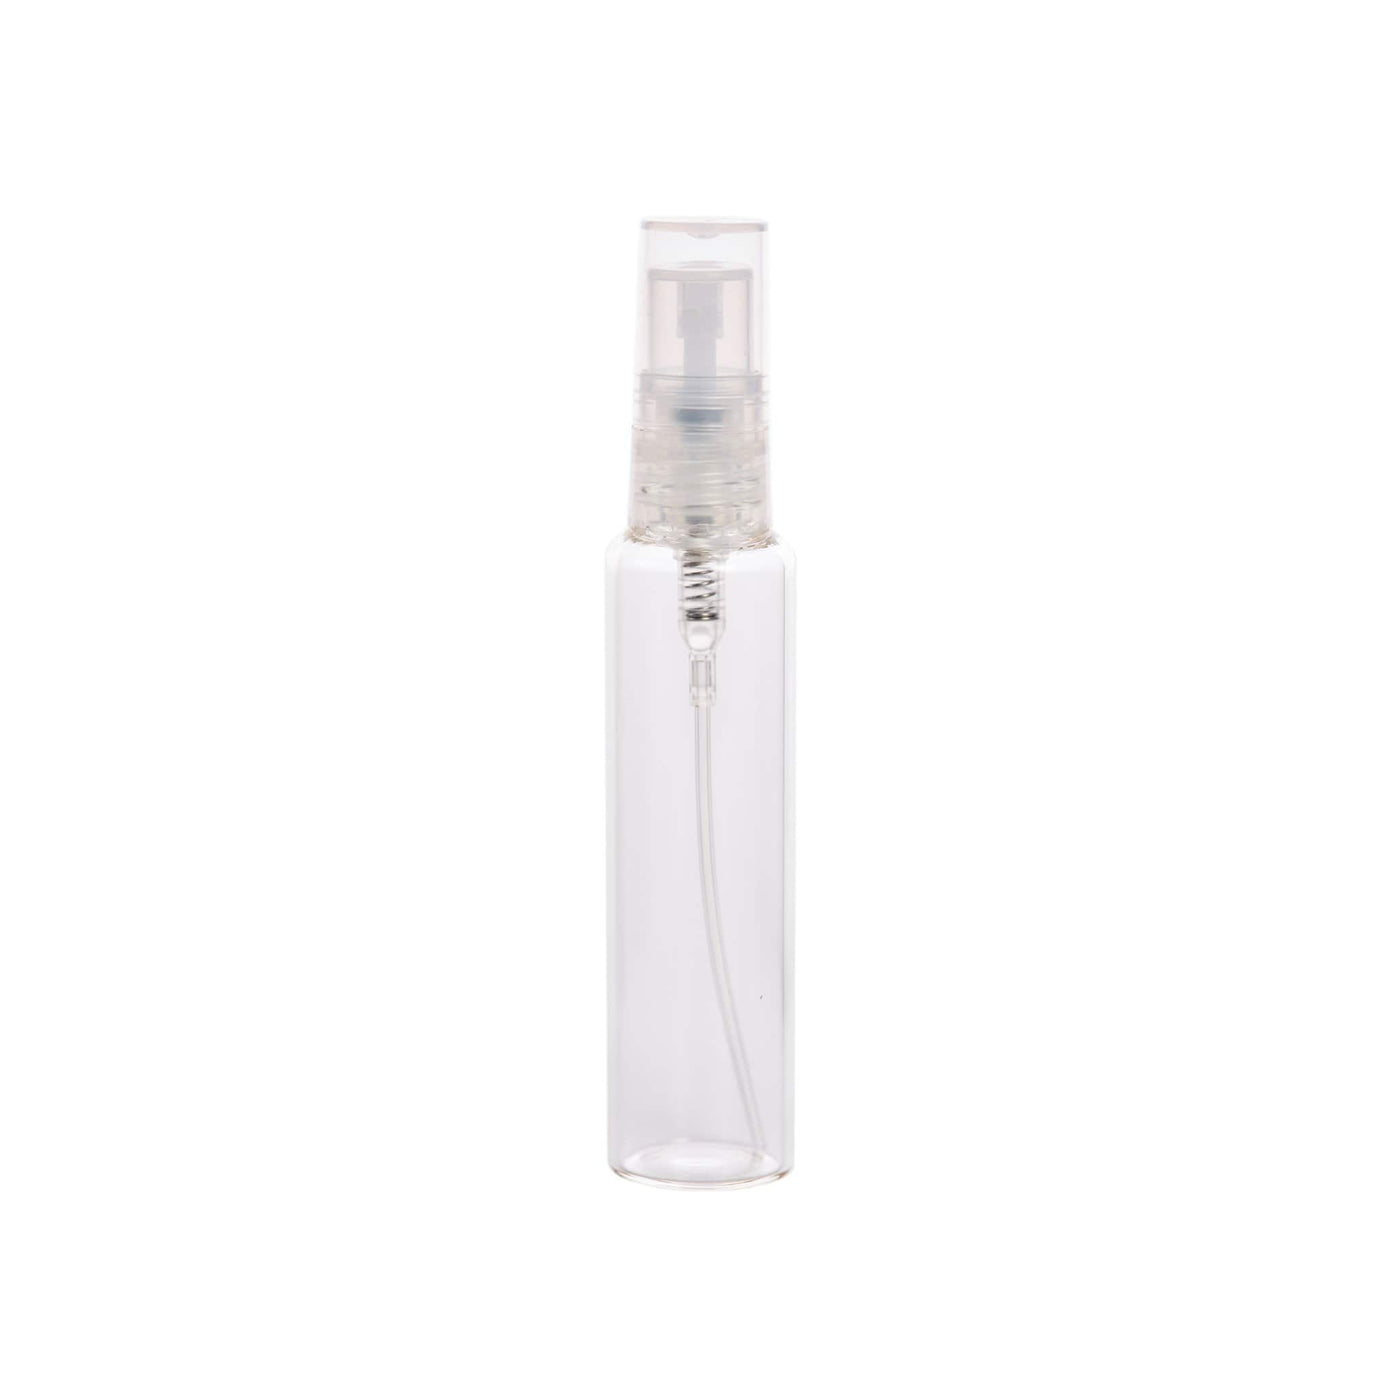 10 ml Clear Atomizer - 3Pk - Oil Life Canada - Canada's Best Essential Oil Supplies